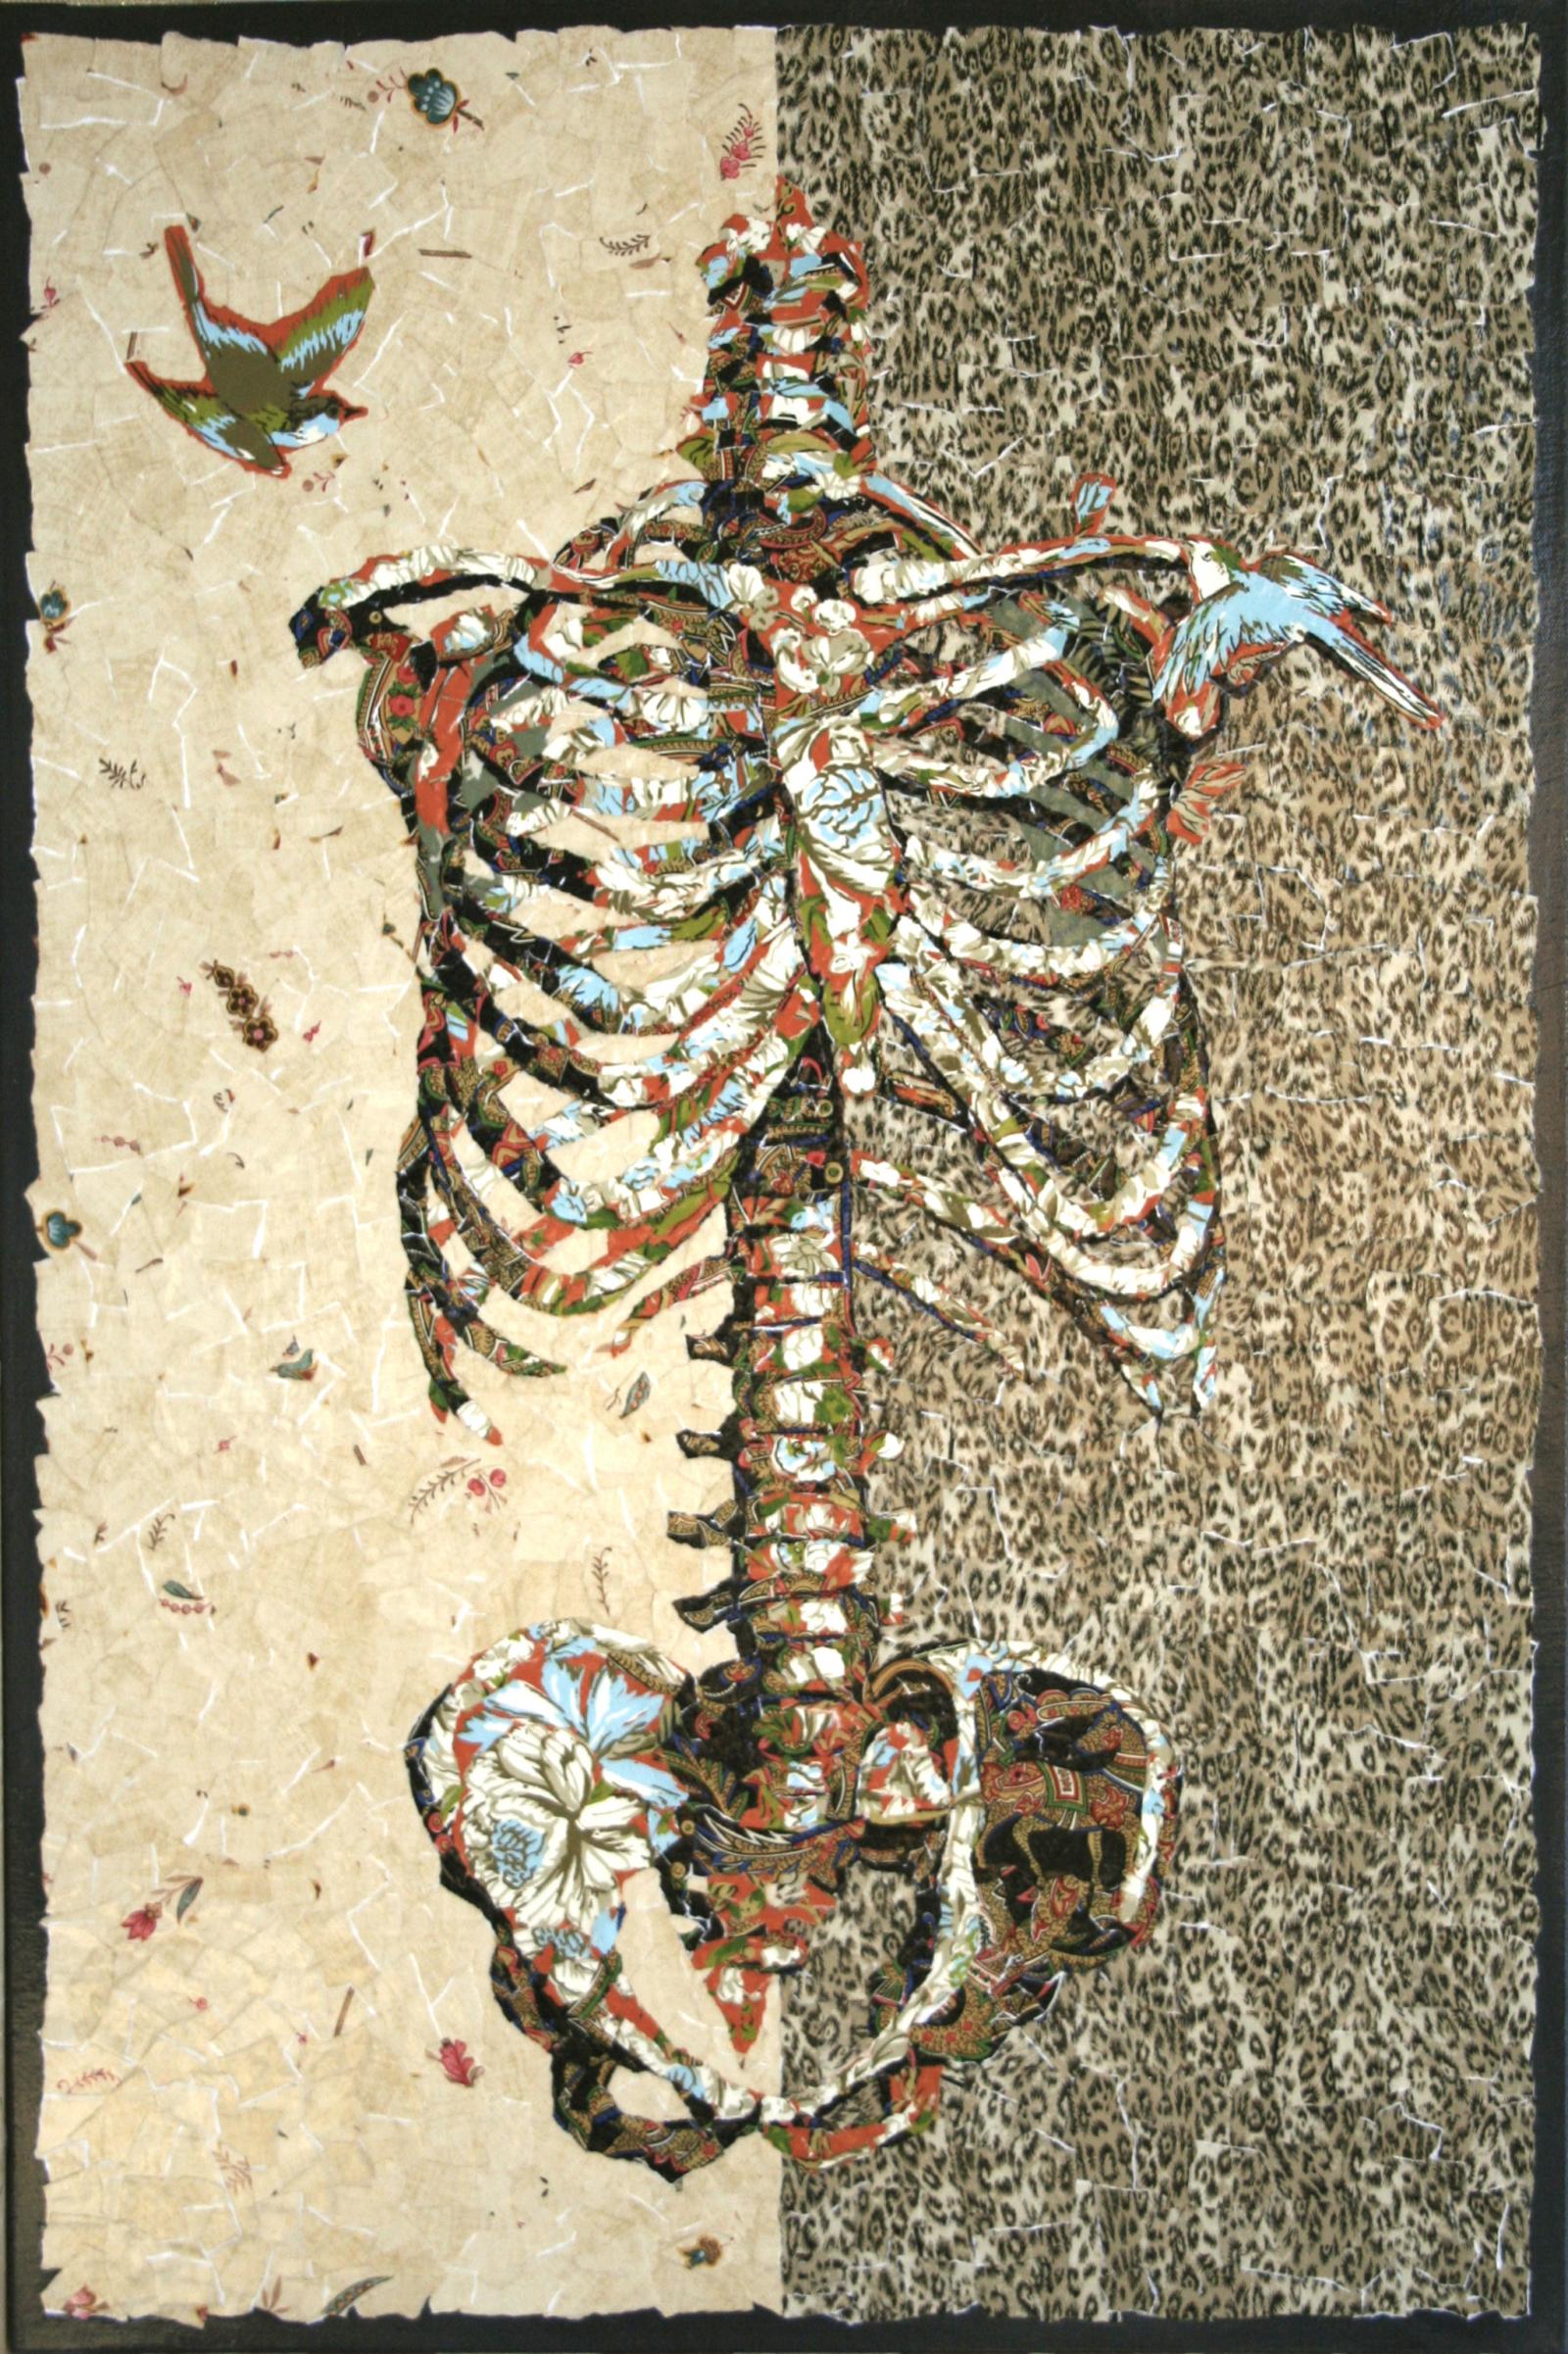 "Bird Cage" depicts the mosaic like image of a human skeleton torso on a vertically split background of ripped gold wallpaper on the left and ripped leopard print on the right. Flying around the rib cage are two blue birds looking for a place to nest. From a distance one sees the image of the skeleton but as the viewer gets closer small juxtapositions of torn wallpaper become visible. The piece references life, death, society and anatomy. 